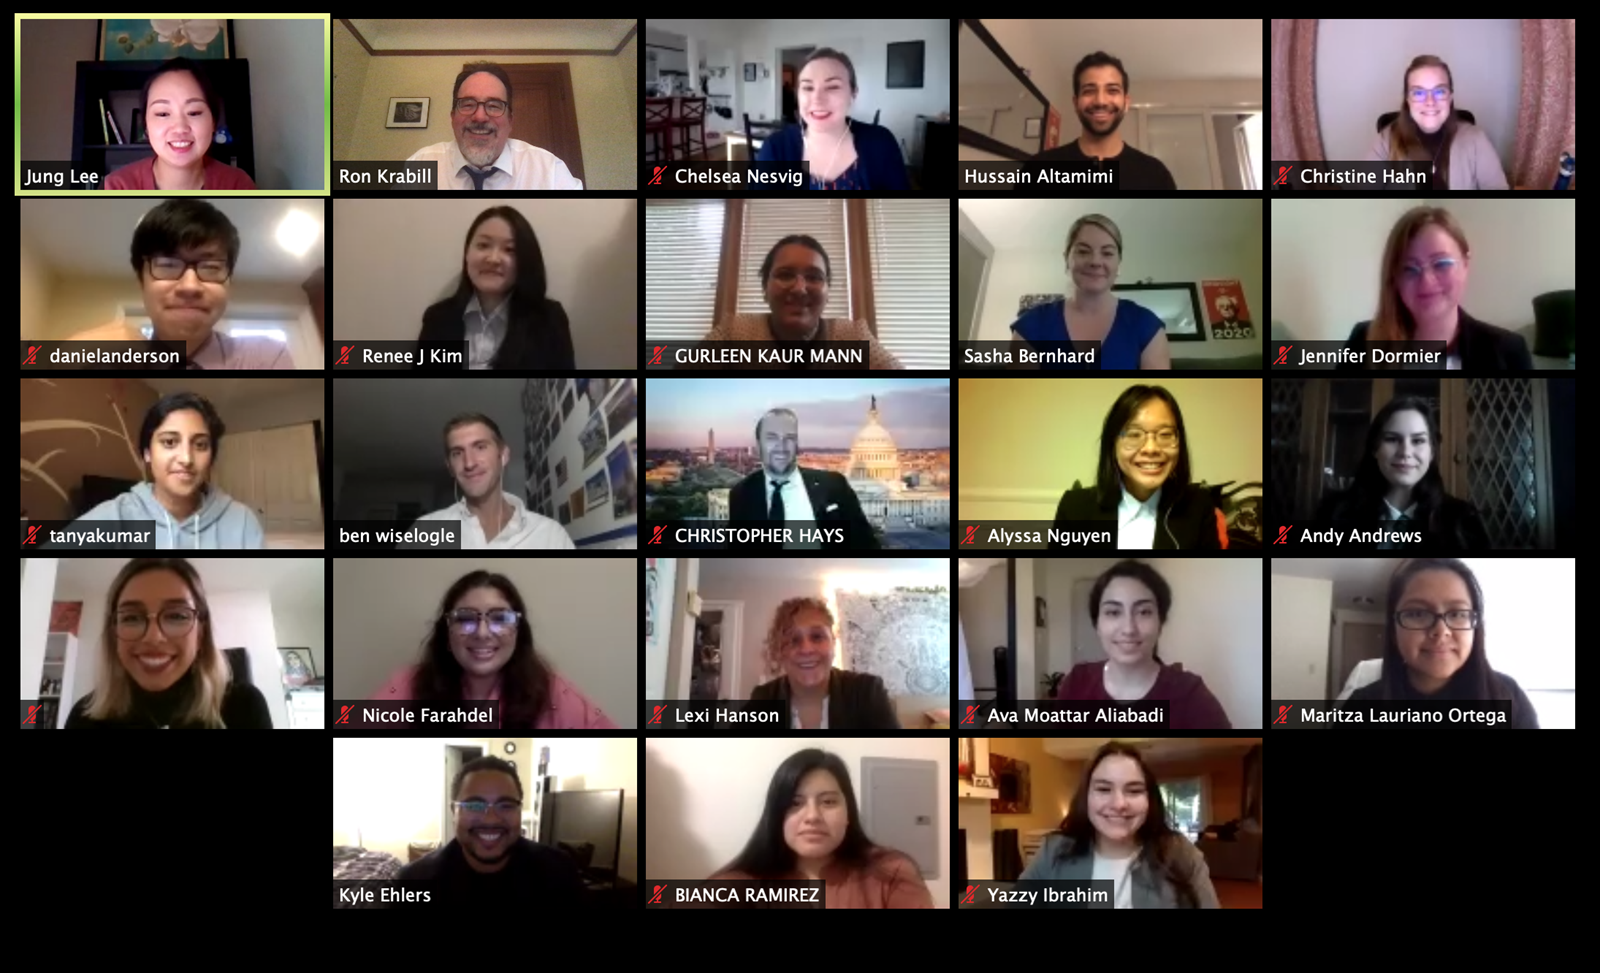 screenshot of Zoom seminar meeting with participants' faces